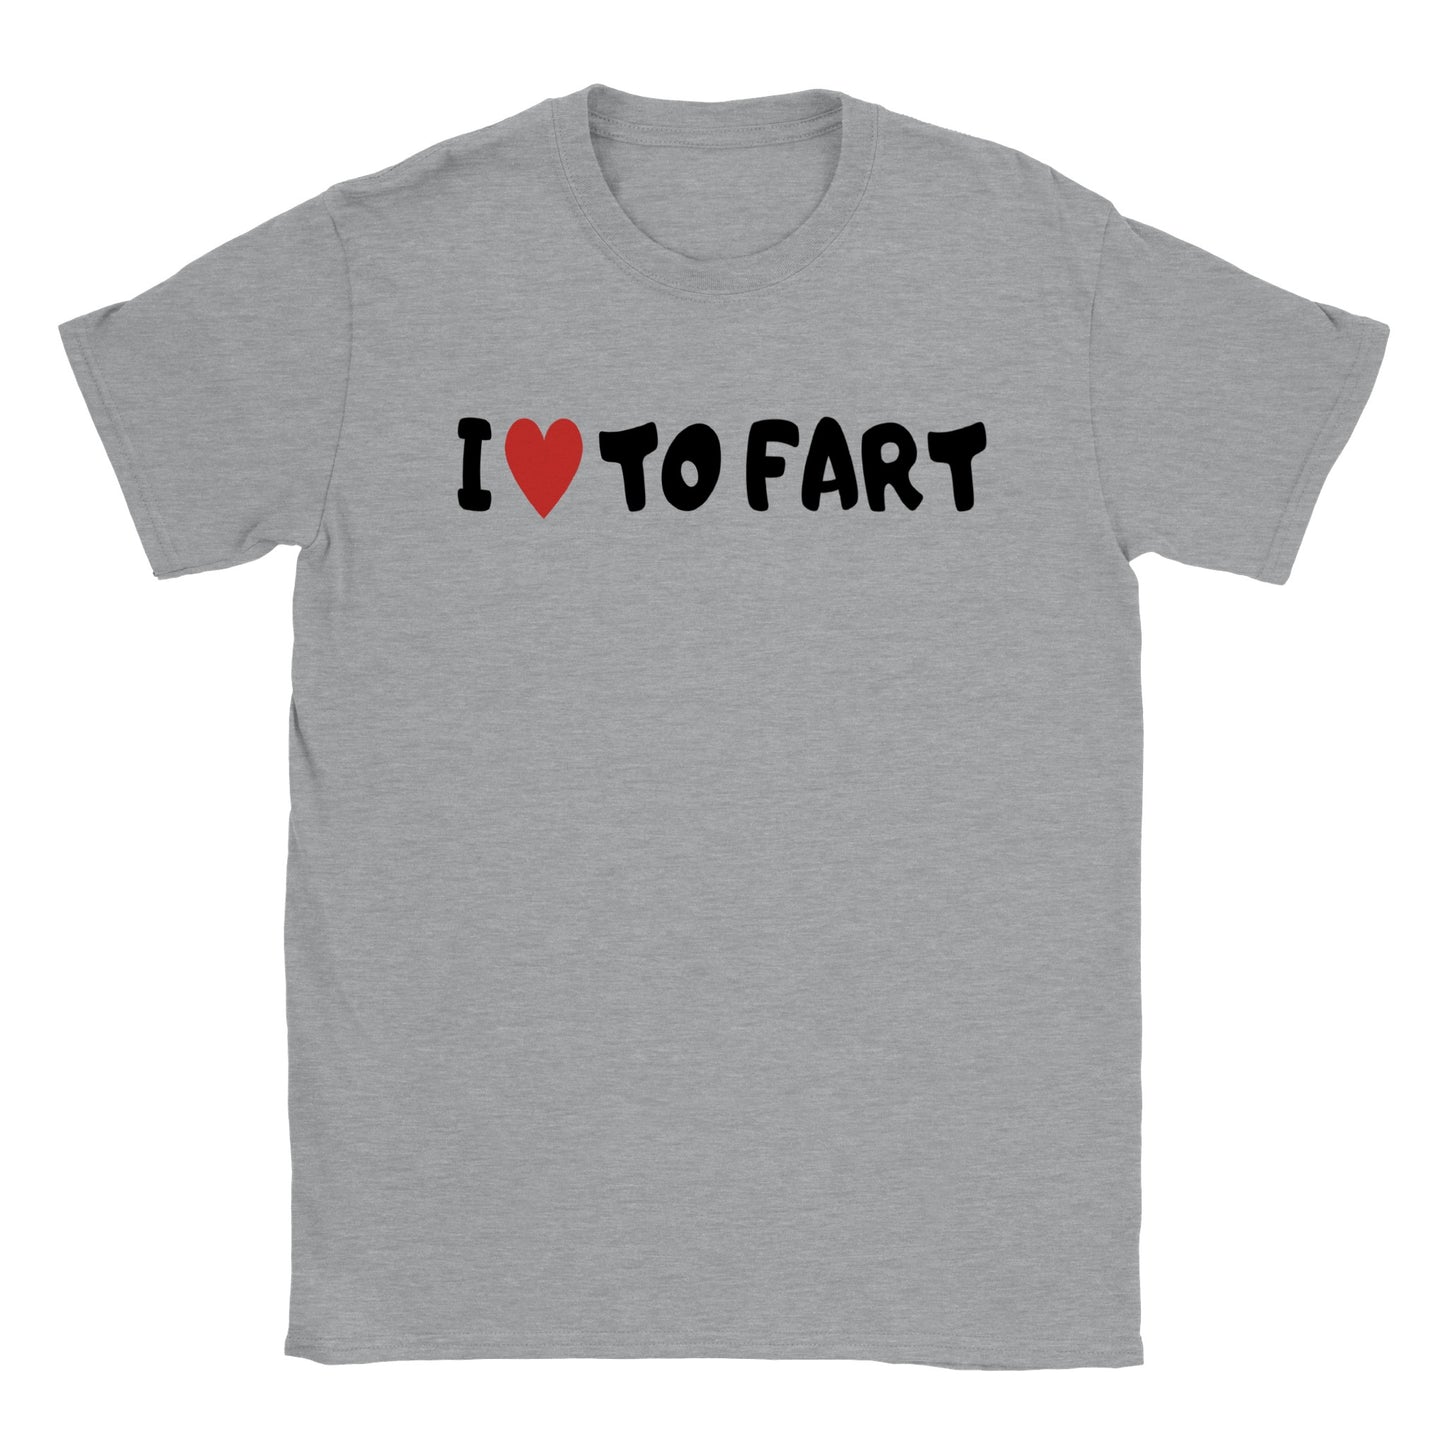 I Love to Fart - Classic Unisex Crewneck T-shirt - Mister Snarky's